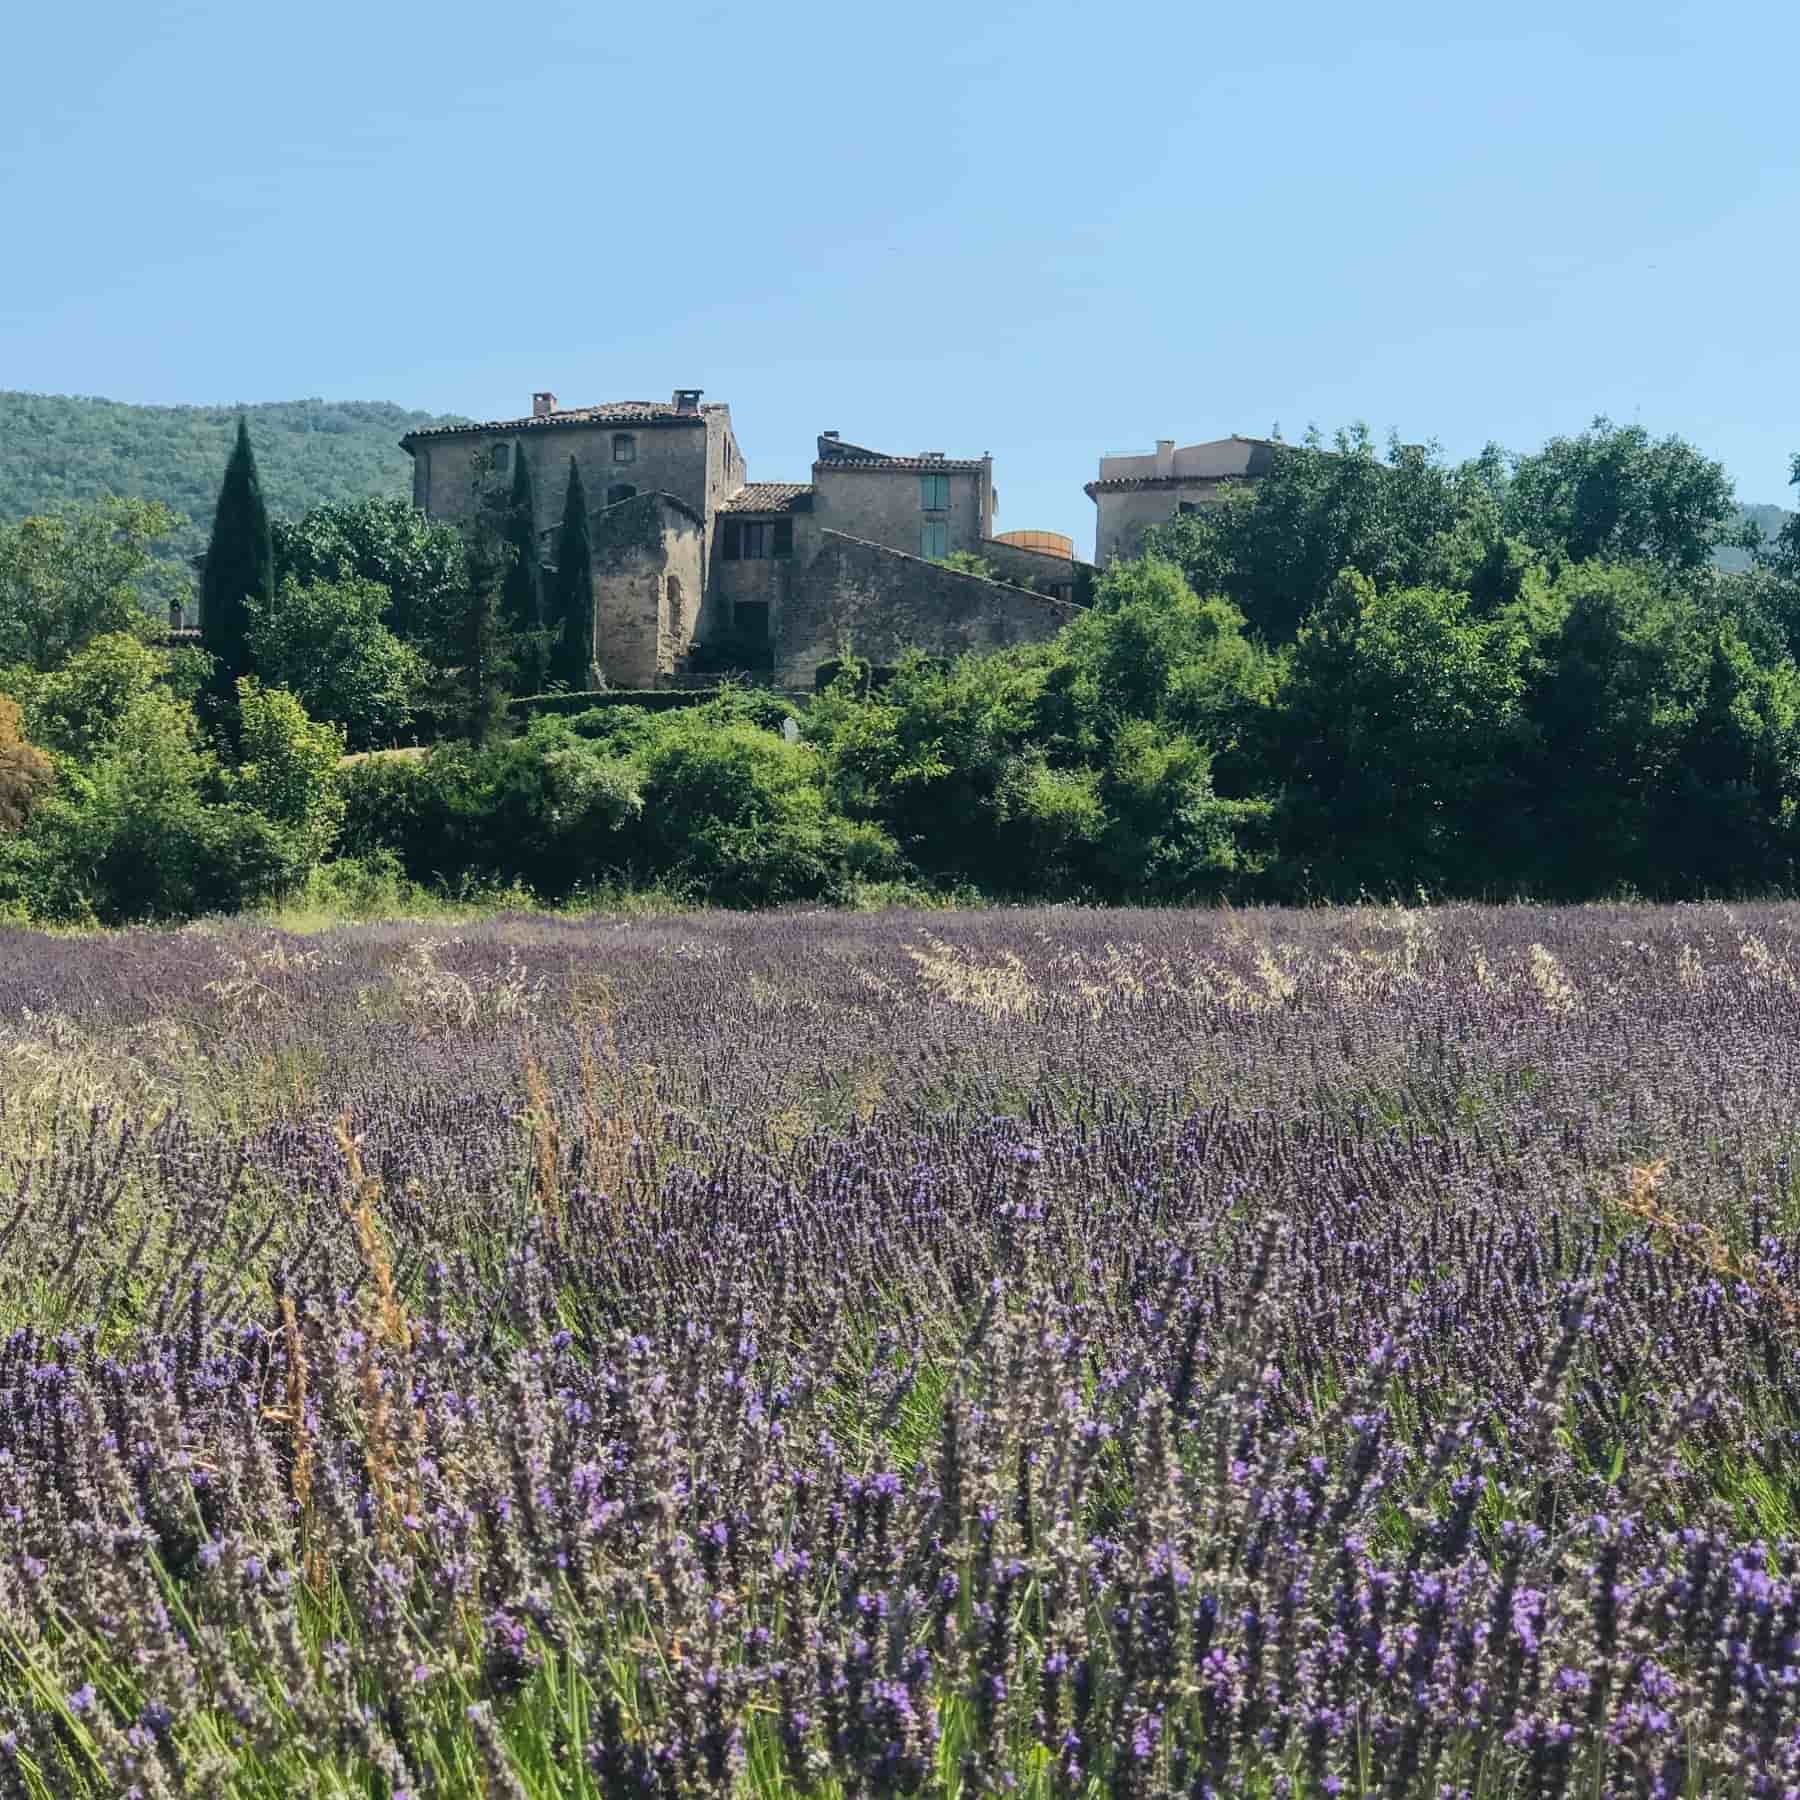 Auribeau with lavender fields in the summer